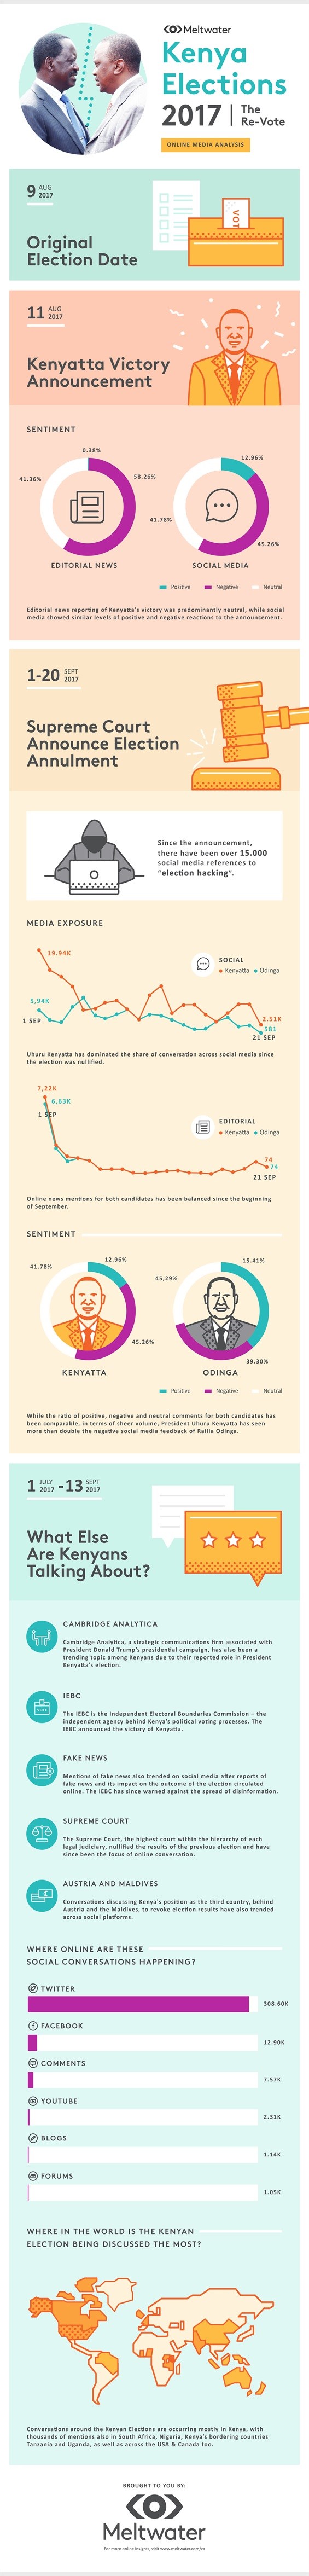 Kenya election annulment: What are Kenyans talking about?